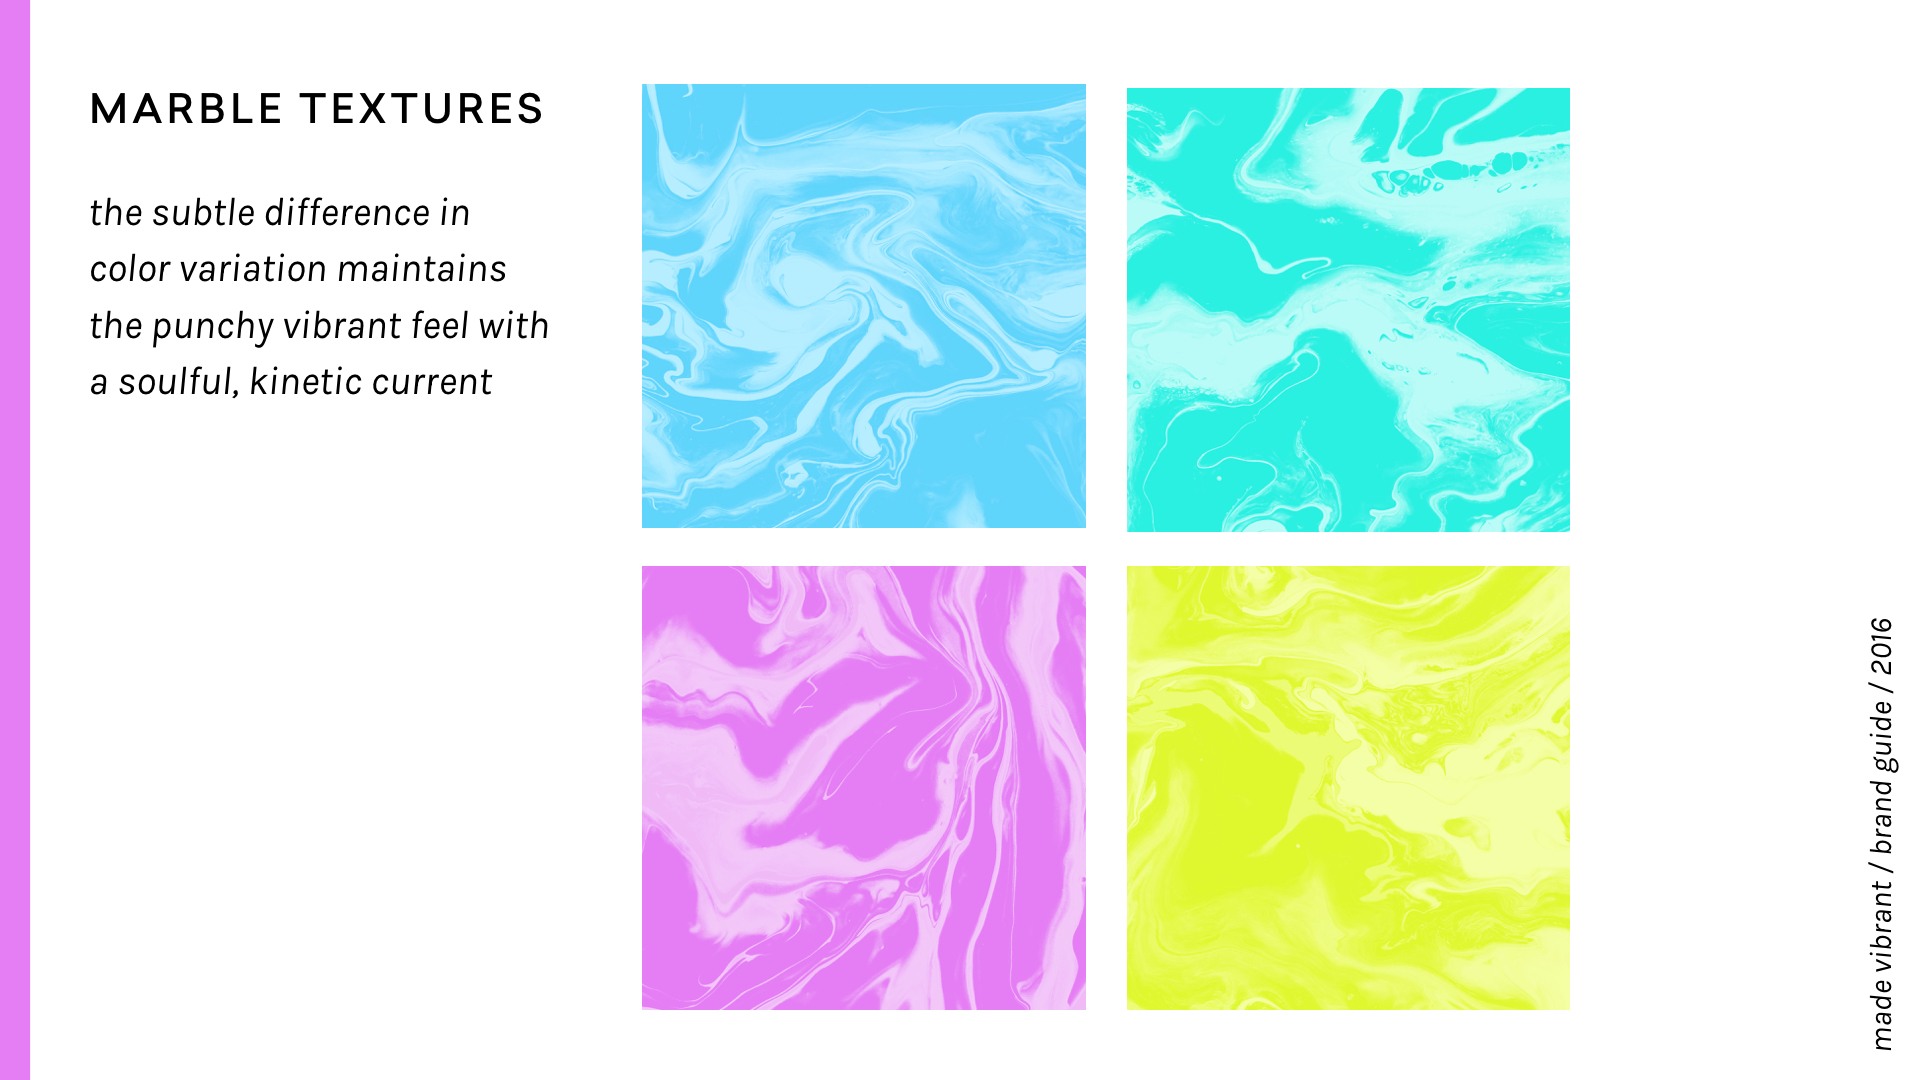 Made Vibrant 3.0 Brand Guidelines / vibrant, approachable, and creative branding / vibrant marble patterns